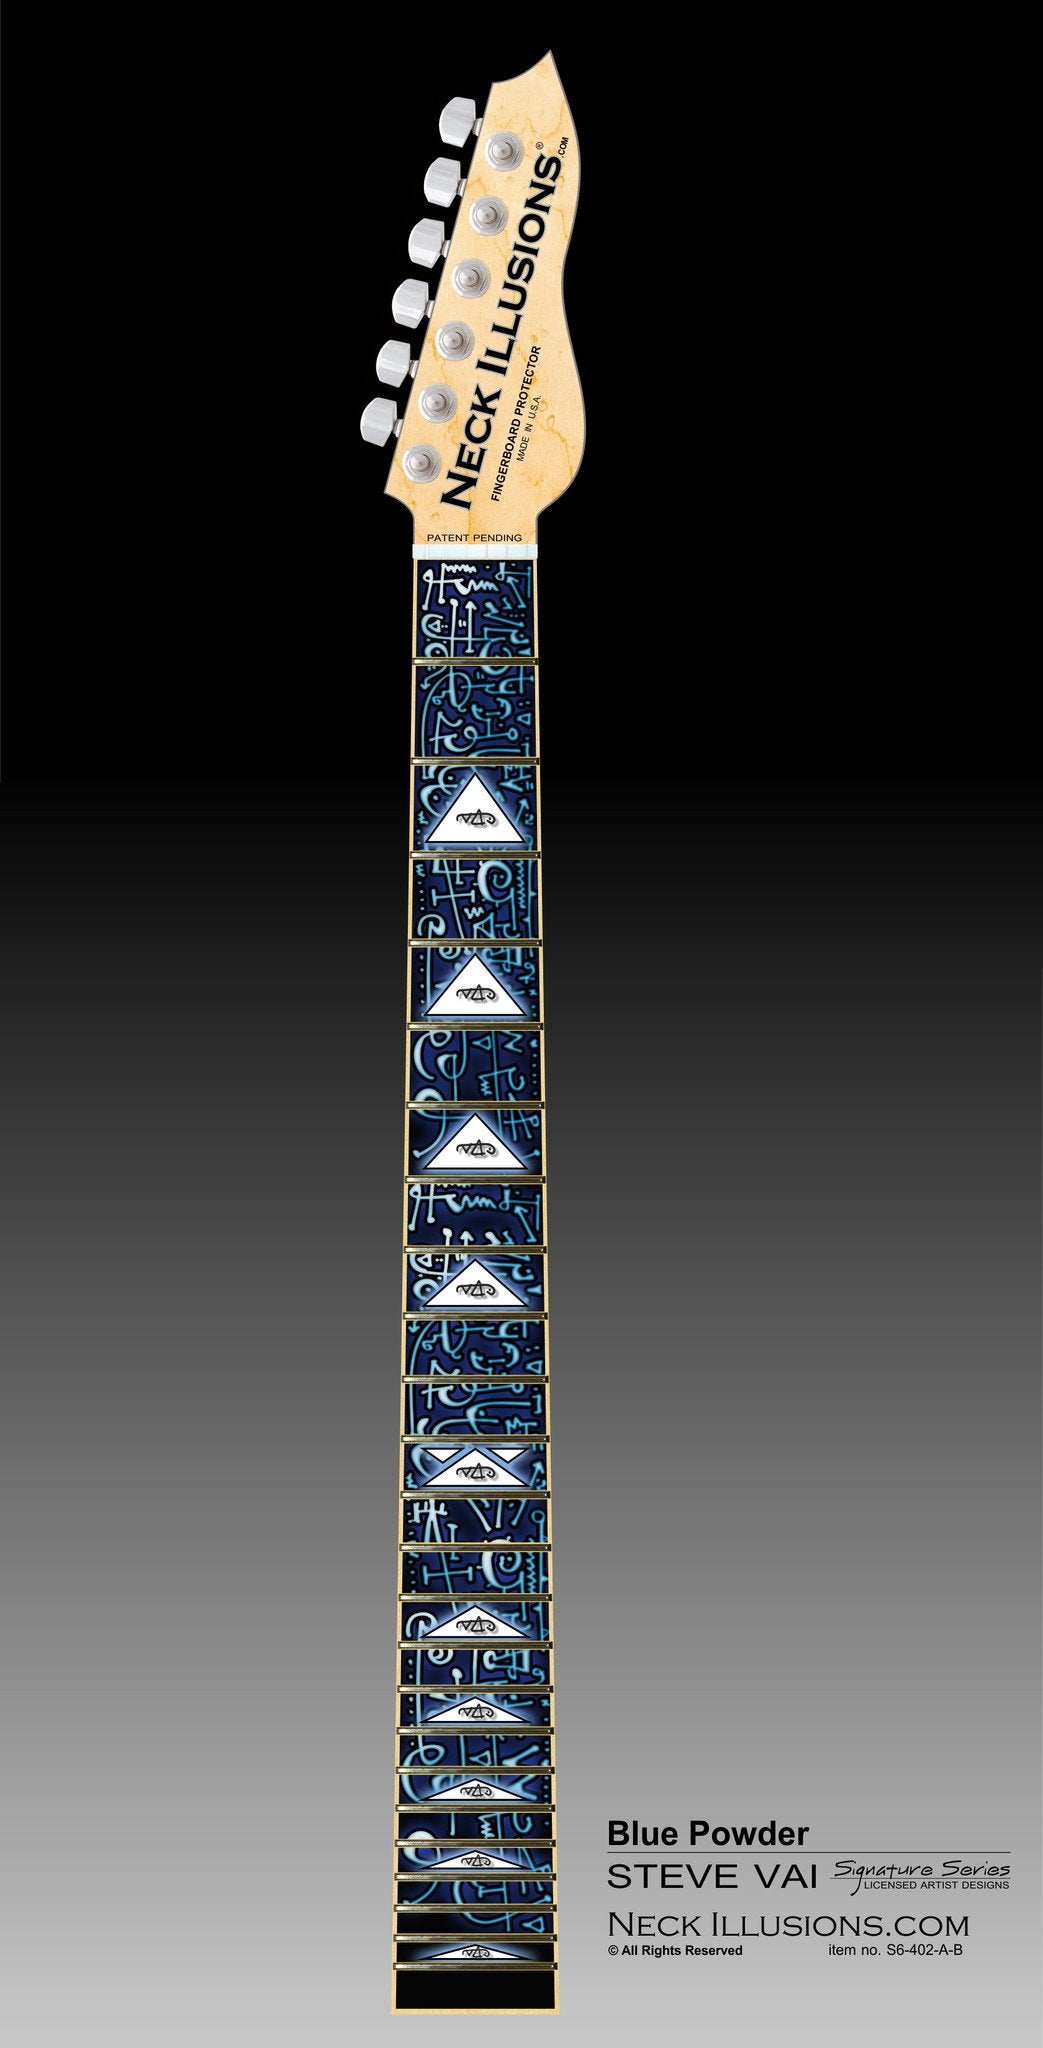  image of guitar neck with a fret protector on it against a black to grey to white gradient background. it has a lot of abstract shapes in black, white, and light blue. some of the spaces have white triangles with a black outline with the steve vai logo in the center. The steve vai logo makes the word "vai" with an upside down triangle, a right side up one, and a line going across the triangles with a curl at the end next to the triangle that is upright. 